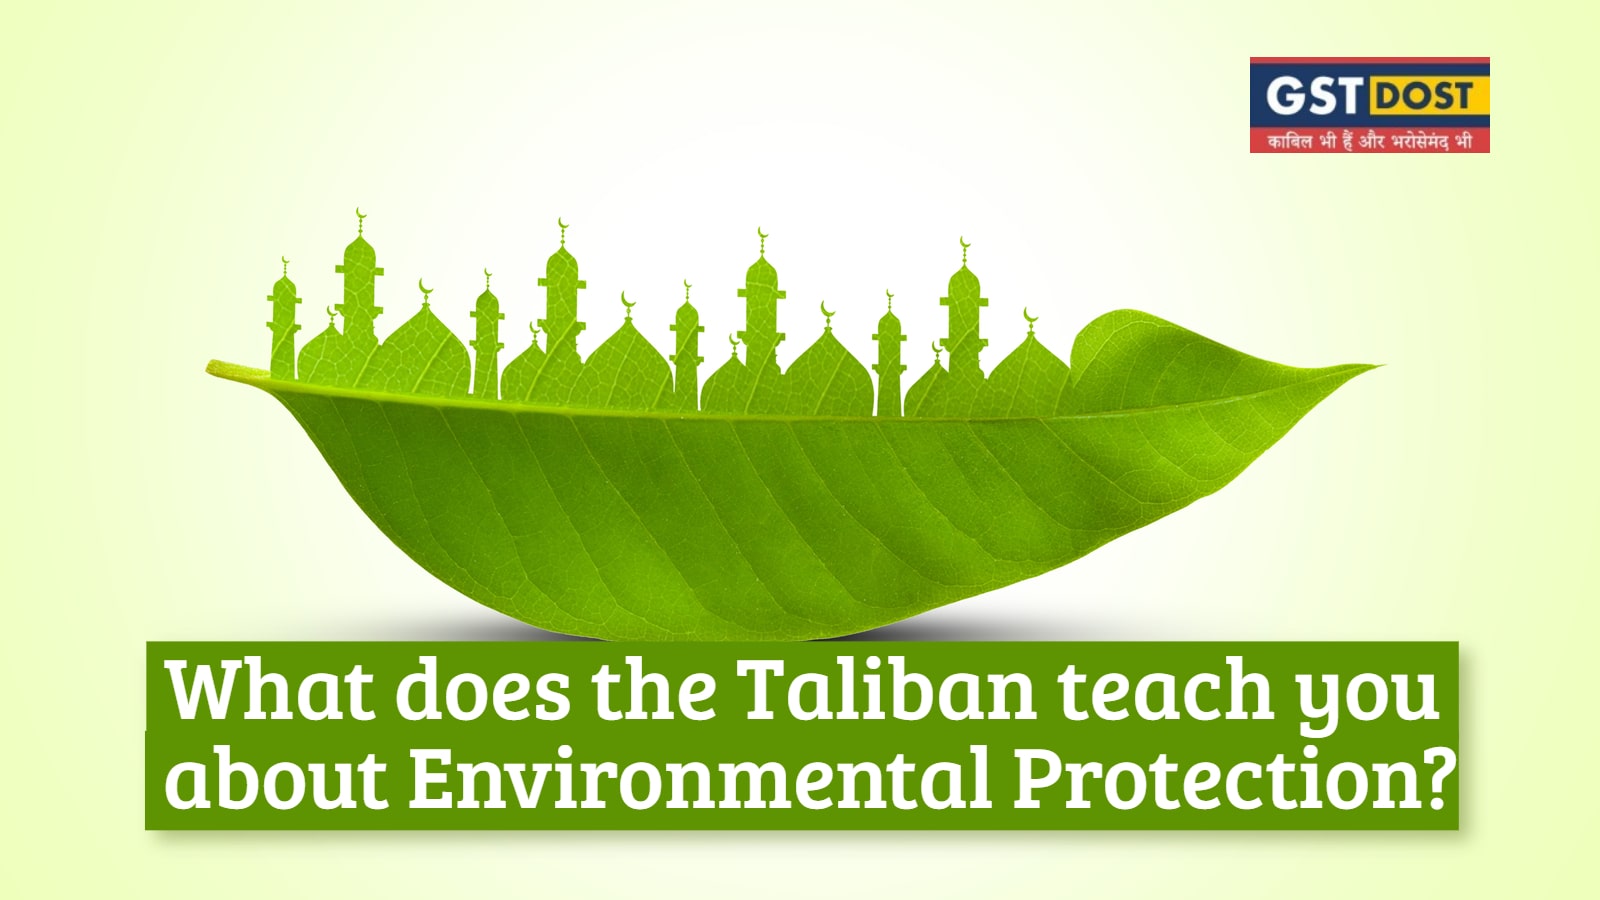 What does the Taliban teach you about Environmental Protection?